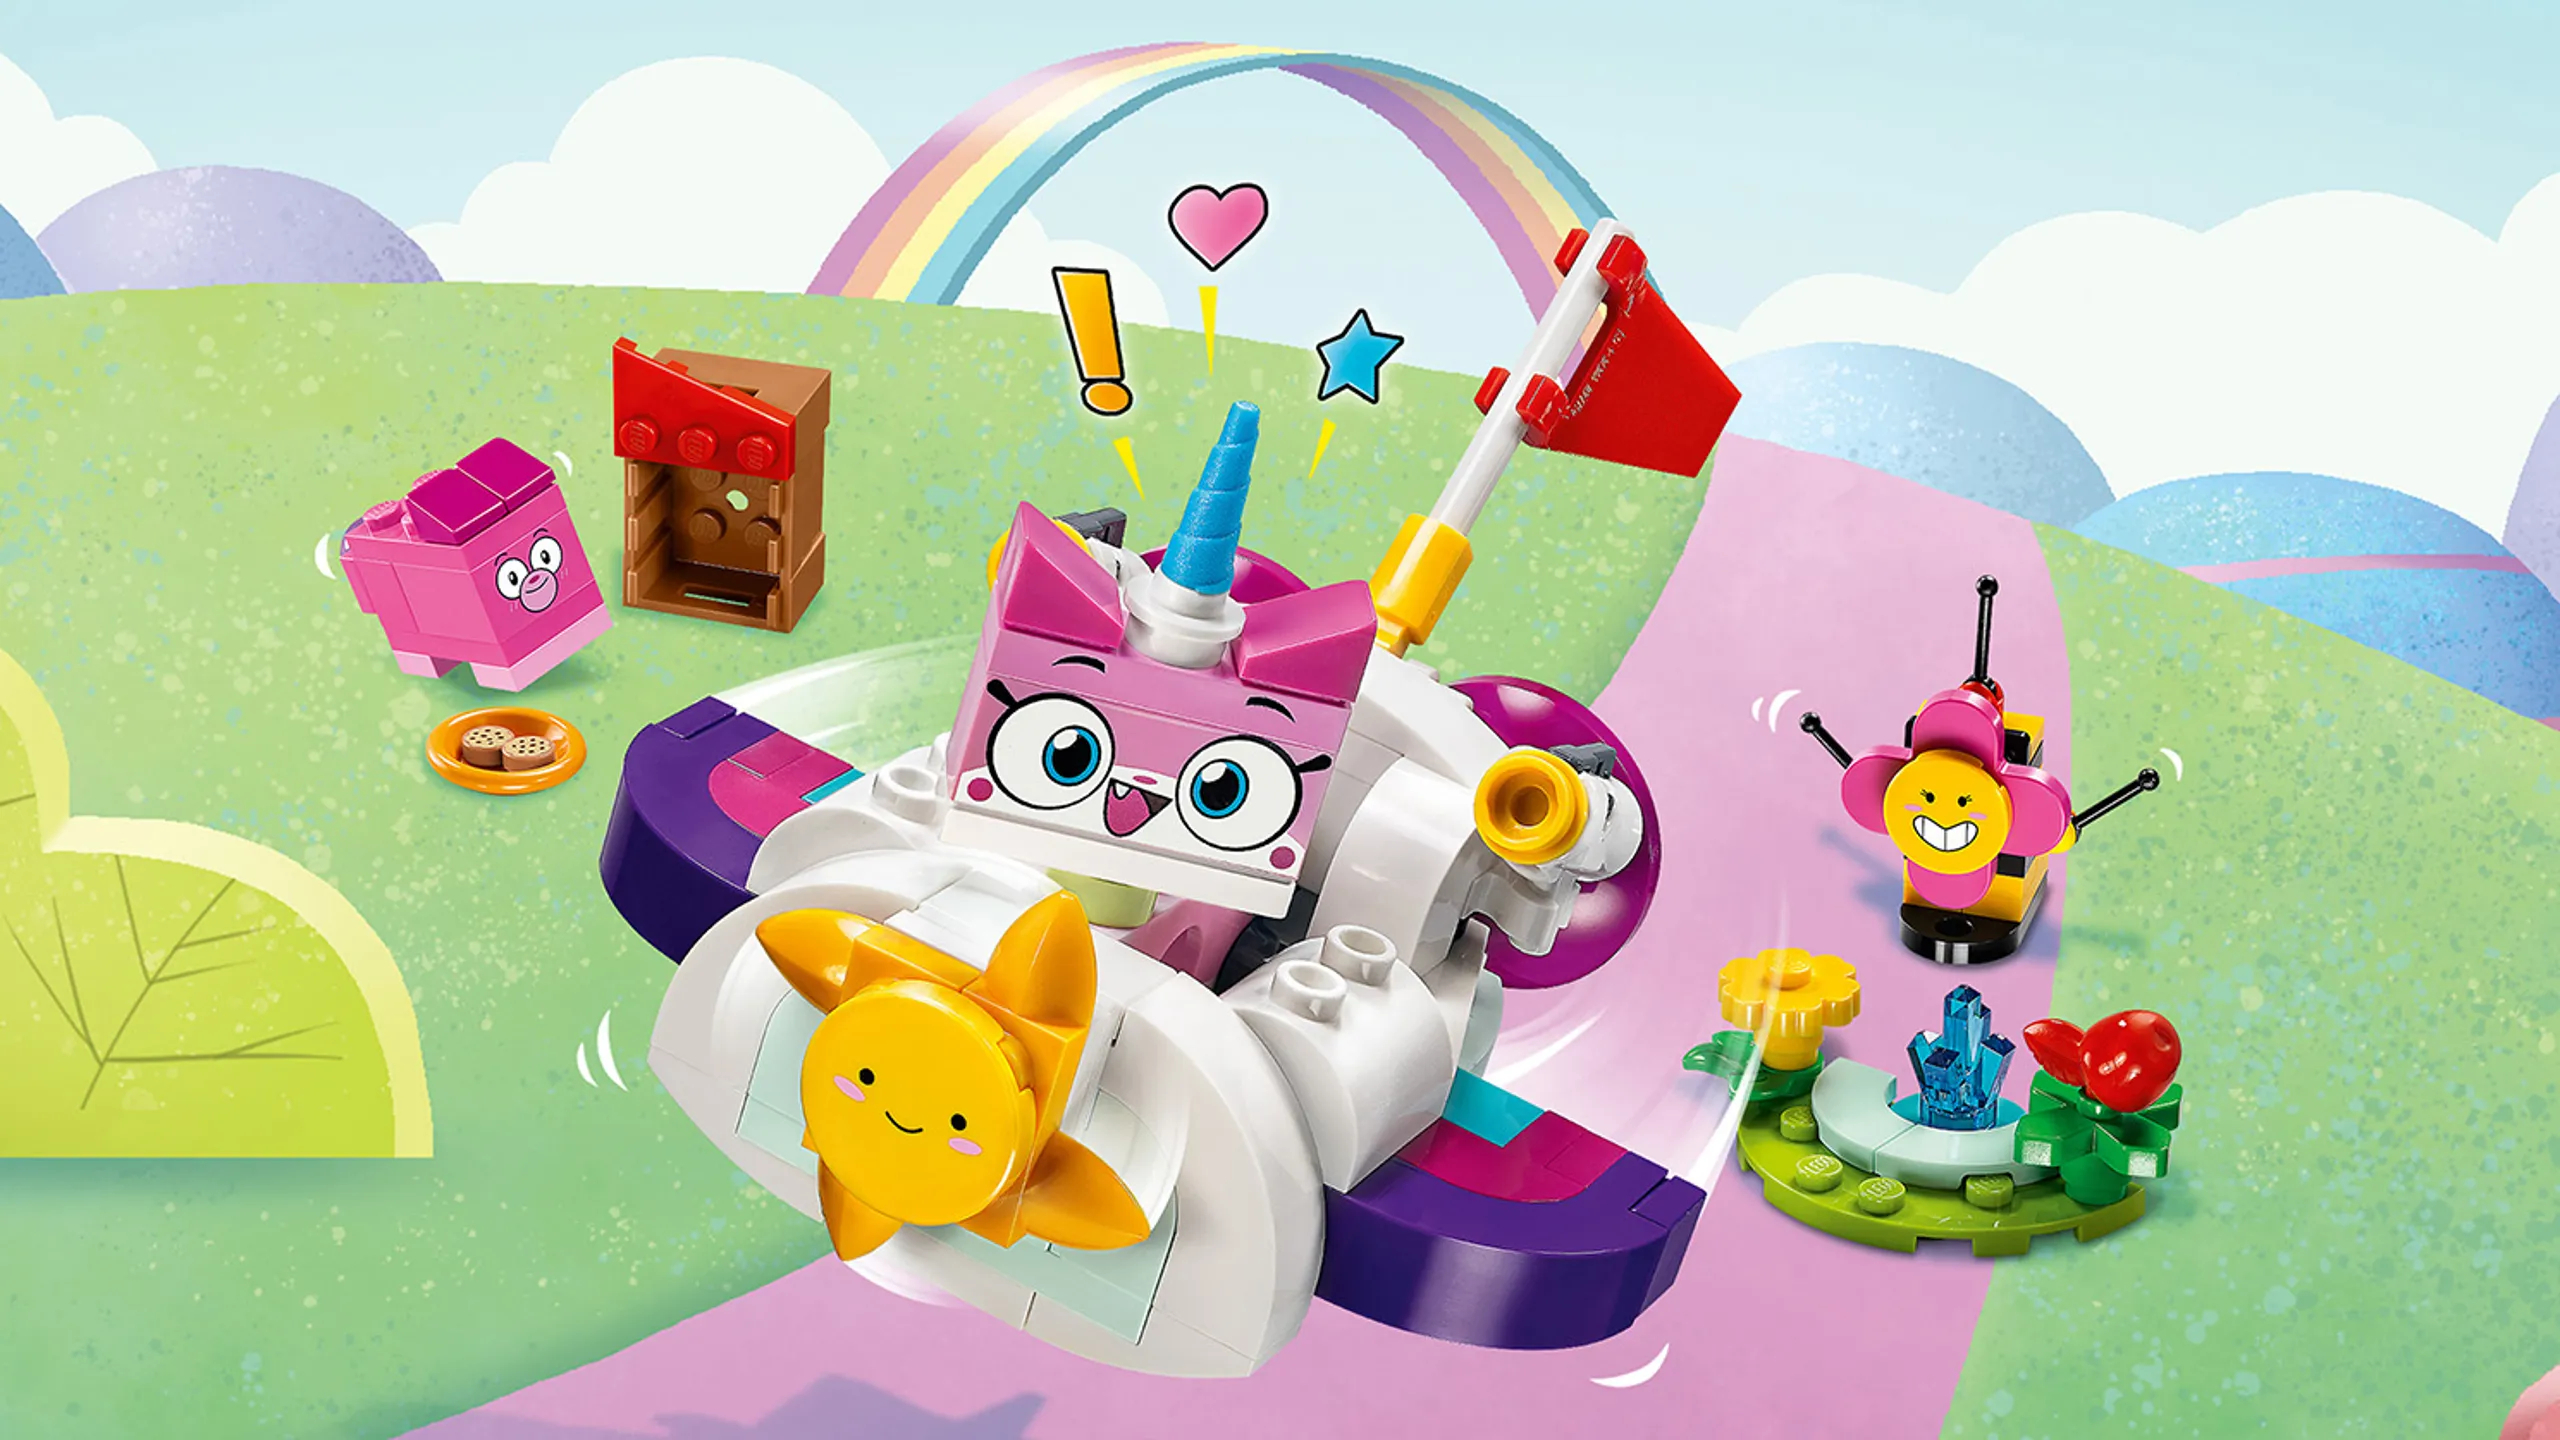 LEGO Unikitty - 41451 Unikitty Cloud Car - Float around with Unikitty in the car, shooting sparkle matter from it as she goes, and meet up with her friends in the park.